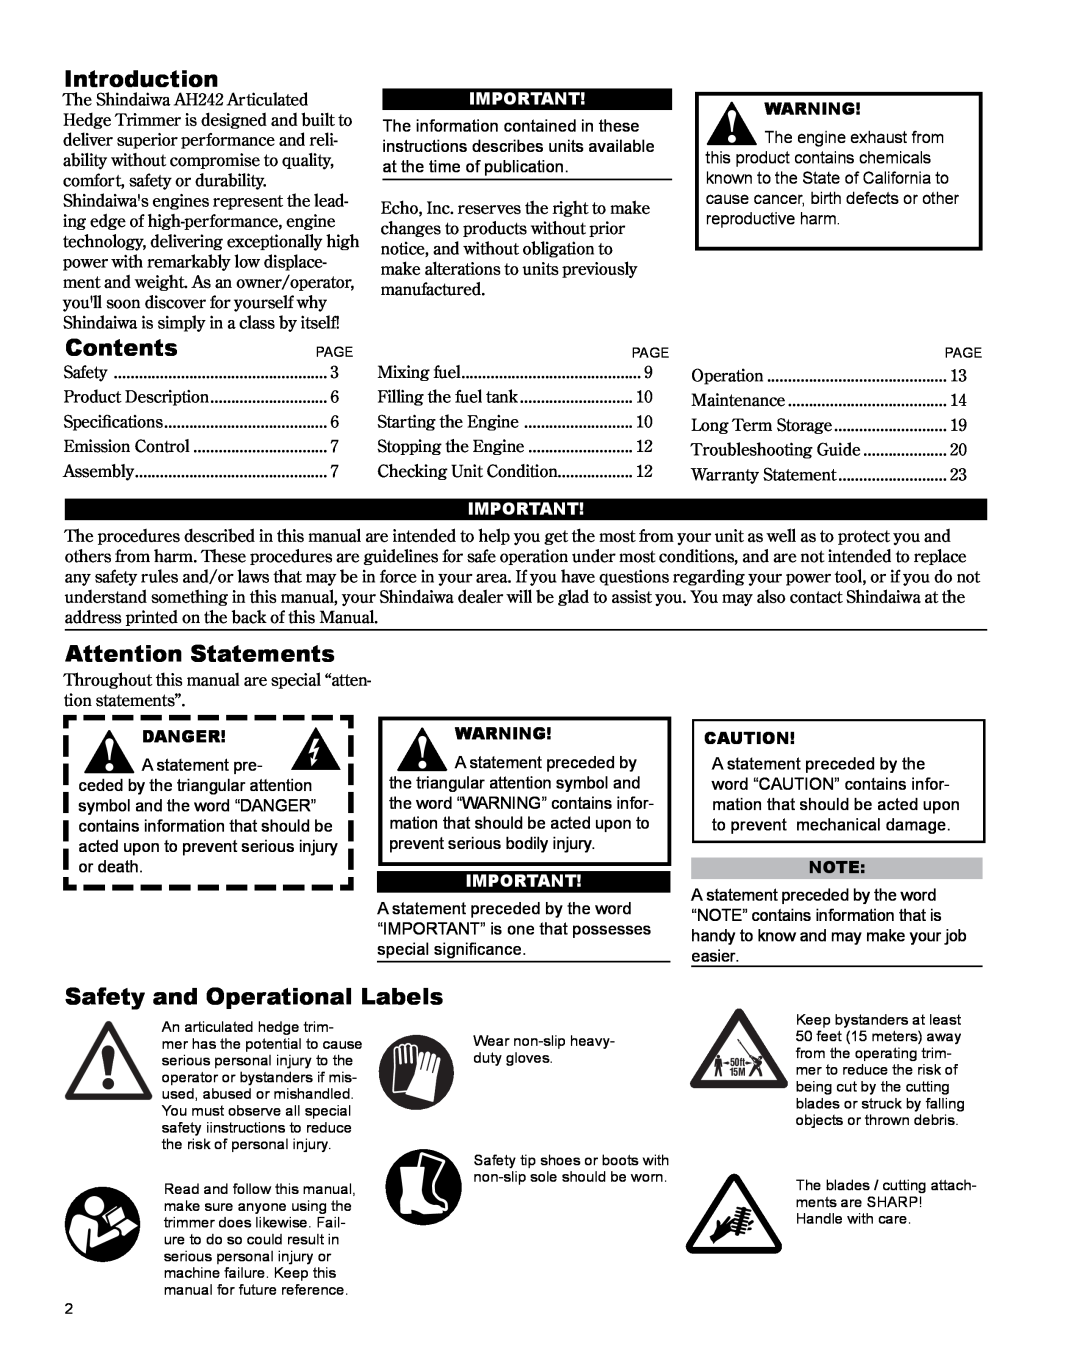 Shindaiwa AH242es, X7502801000 Introduction, Contents PAGE, Attention Statements, Safety and Operational Labels, Danger 